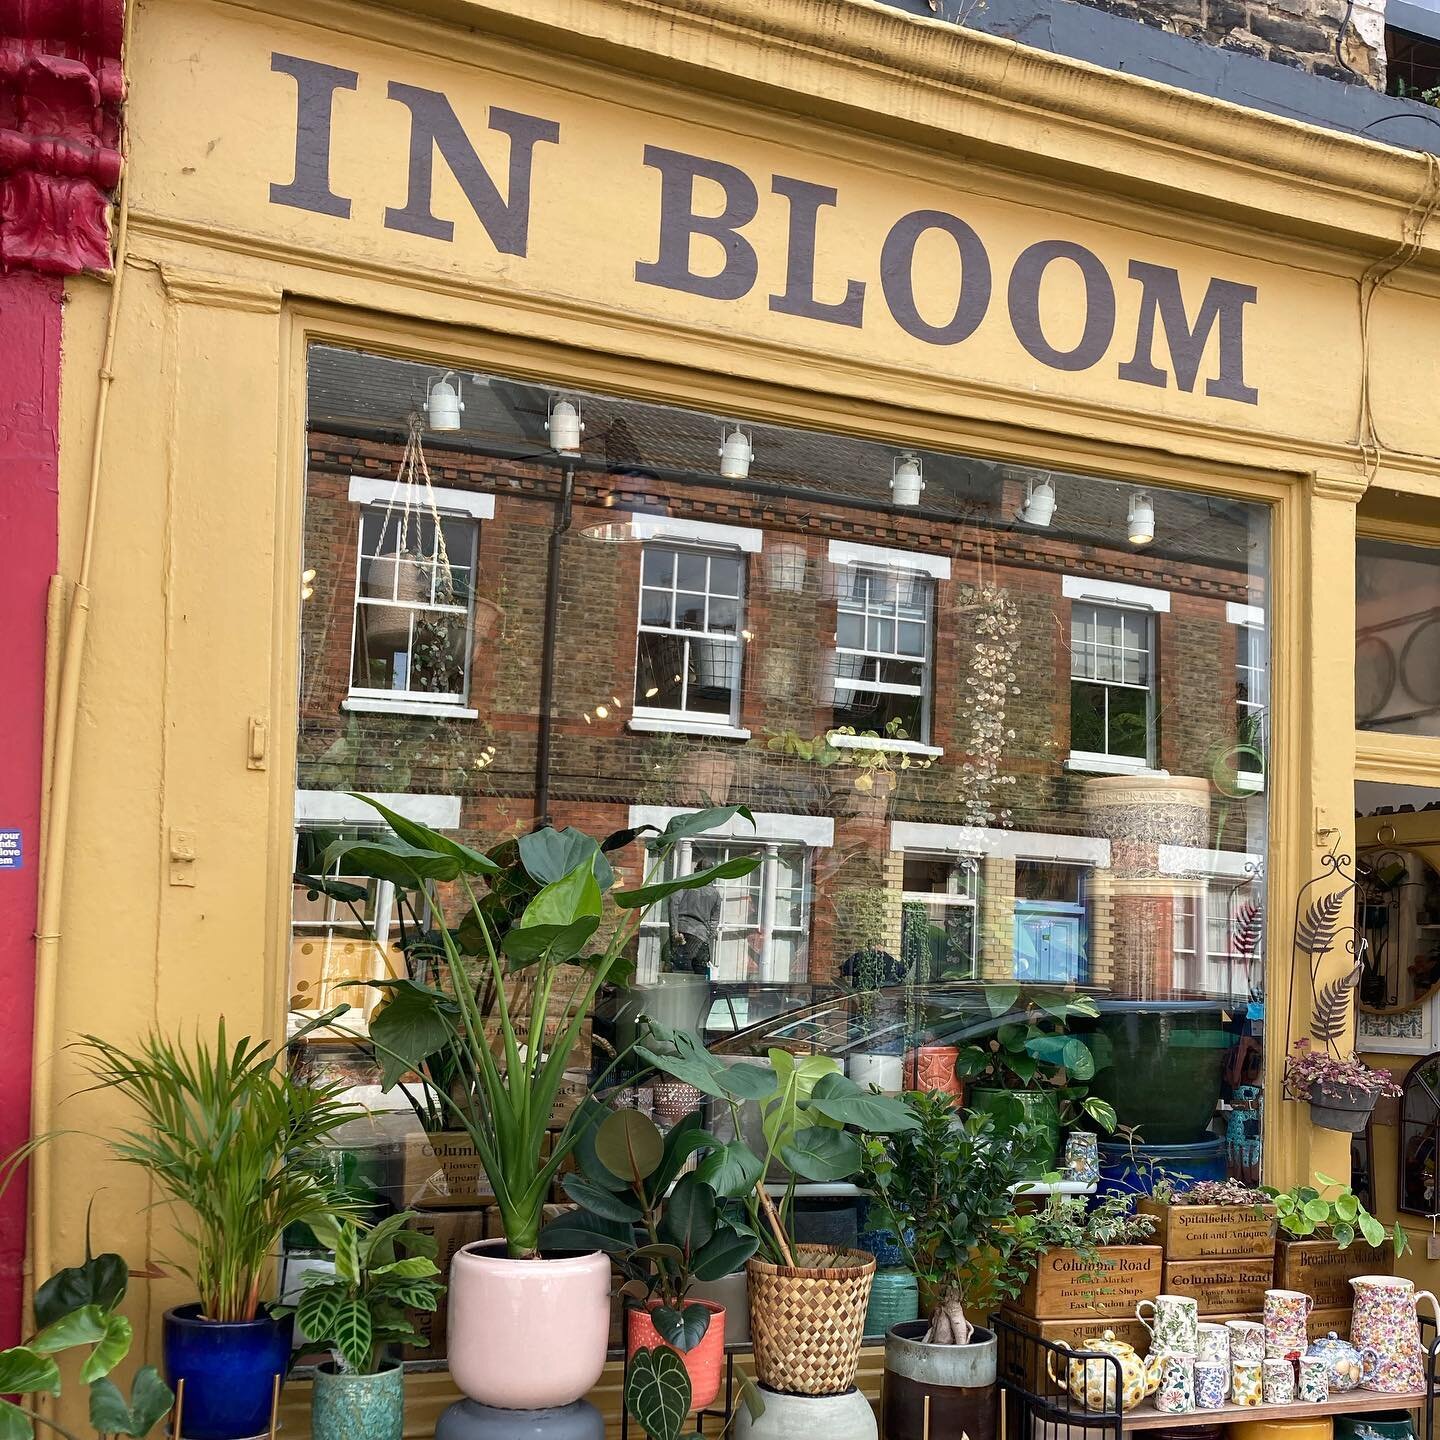 Trip to the big smoke this weekend to meet new clients and check on ongoing projects&hellip; also manger to find time to go to #columbiaroad  No flower market on a Friday but still fabulous independent shops. Love the displays @inbloom152 may have ev